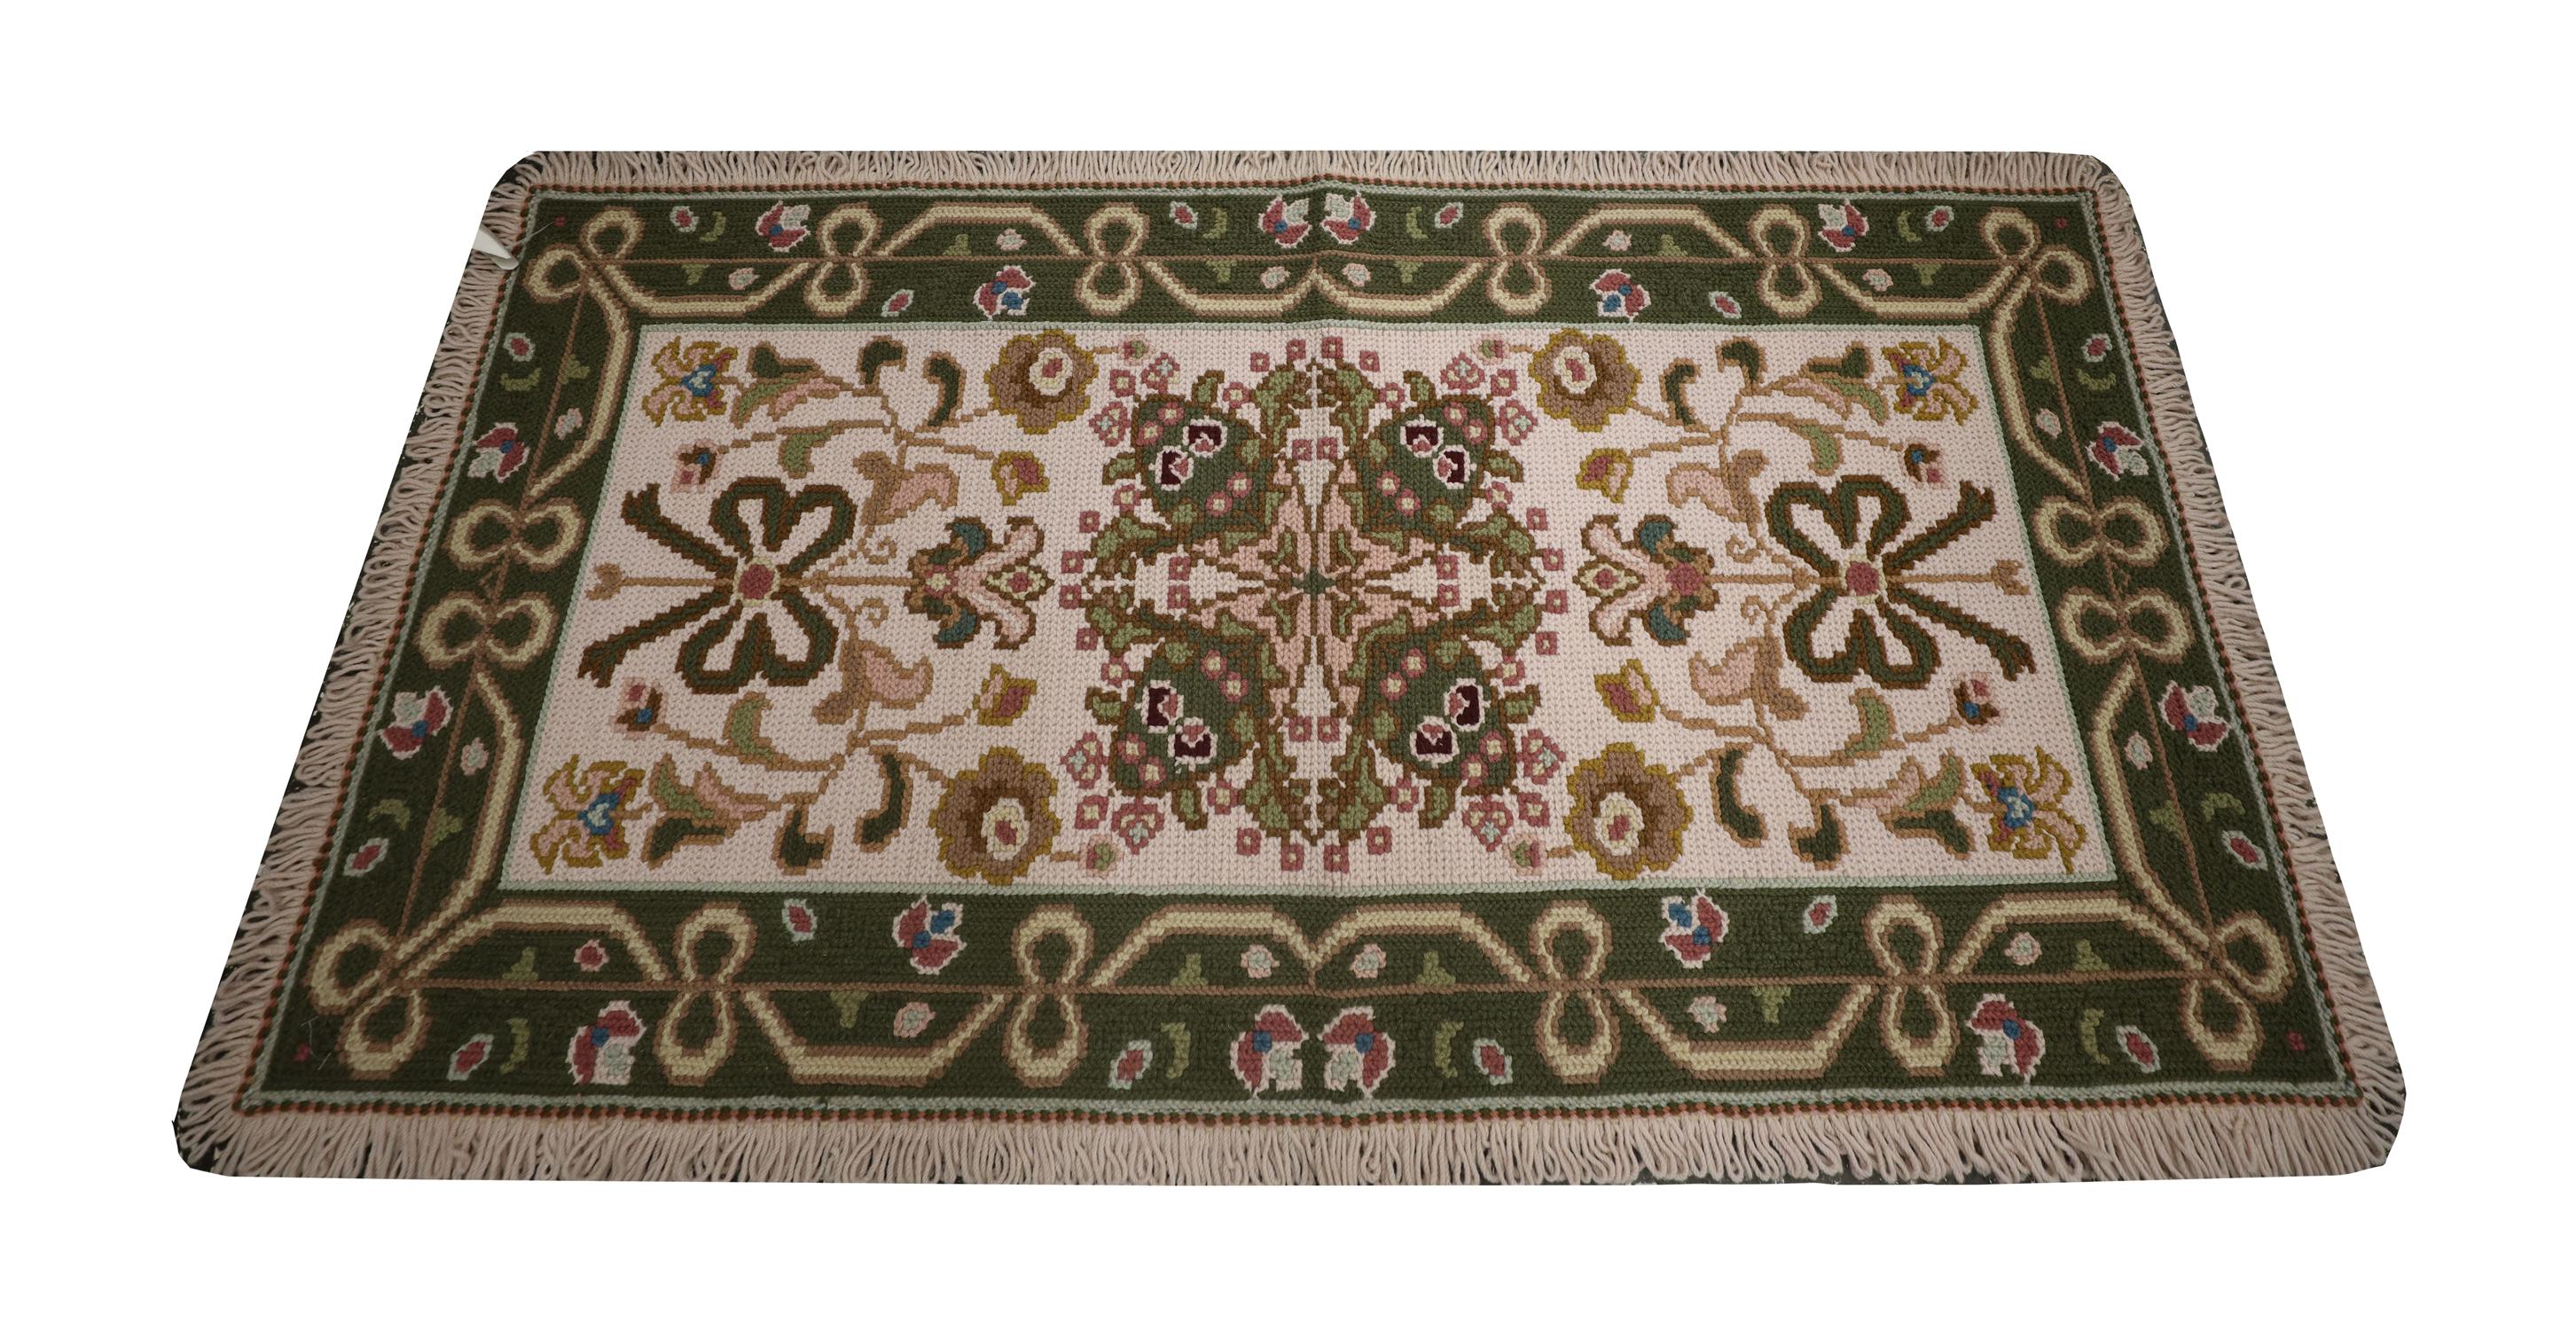 Country Pair of Handwoven Carpet Portuguese Needlepoint Rugs Wool Floral Rugs 65x135cm For Sale